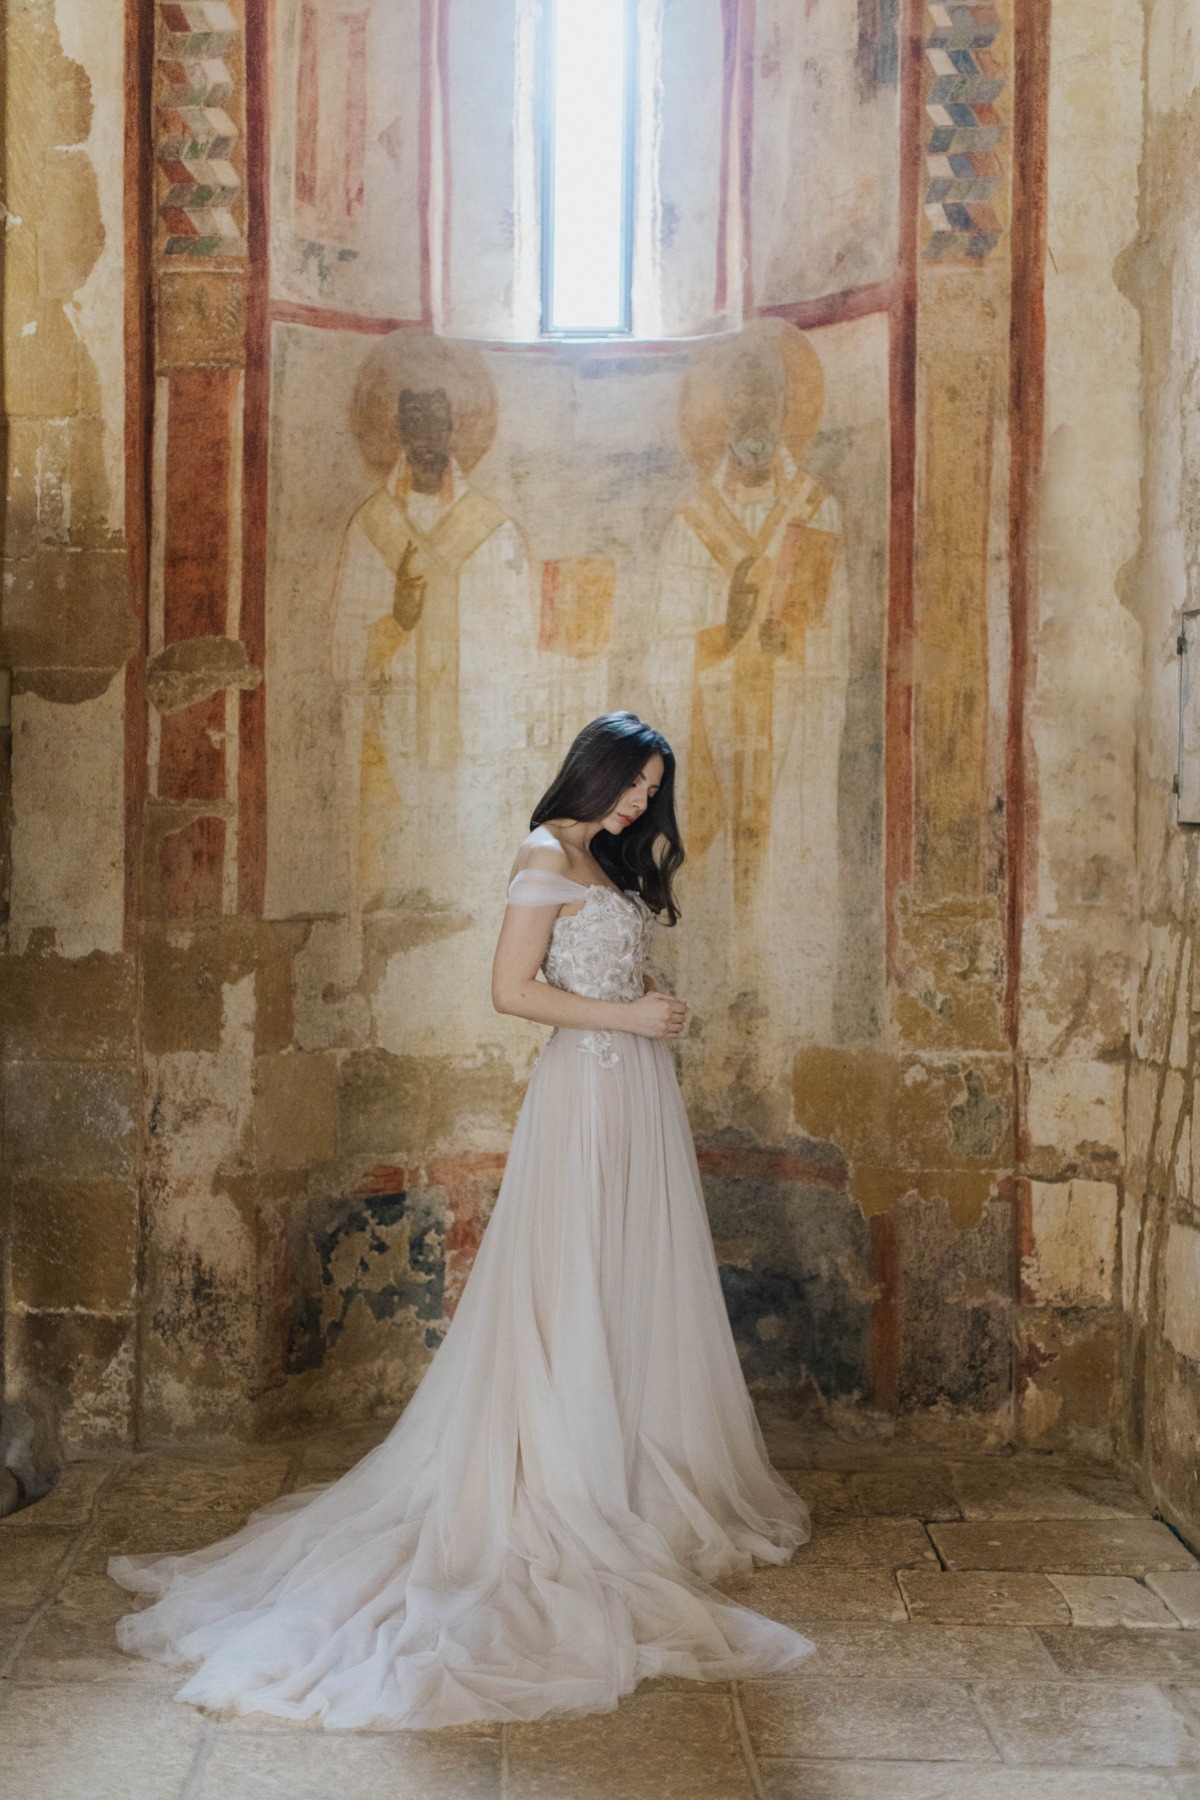 Ethereal Editorial In An Ancient Italian Abbey